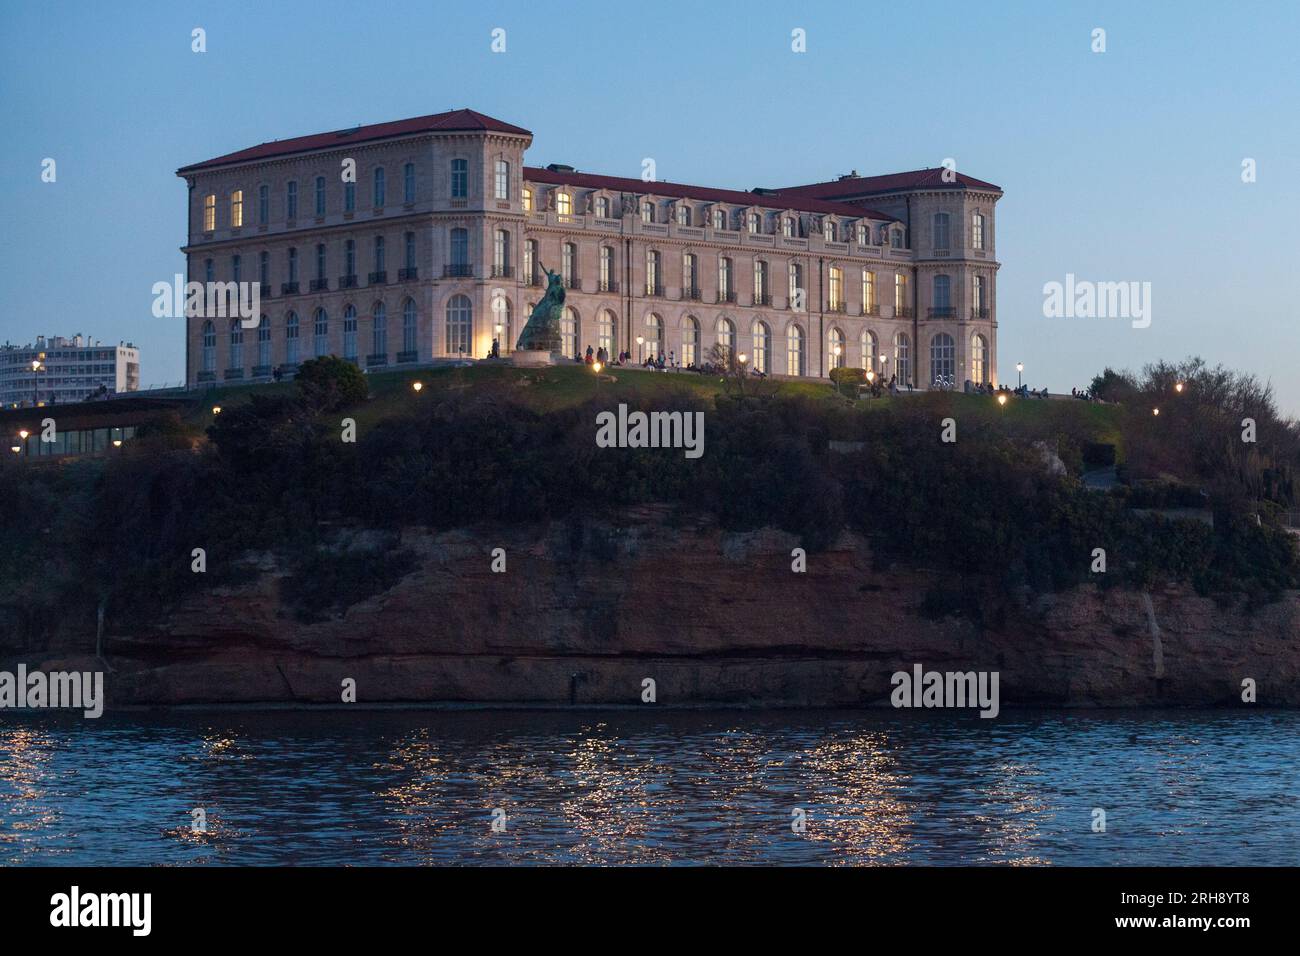 Marseille, France - March 23 2019: The Pharo Palace (French: Palais du Pharo) is a 1858 palace built for Napoleon III, now a conference centre, with g Stock Photo